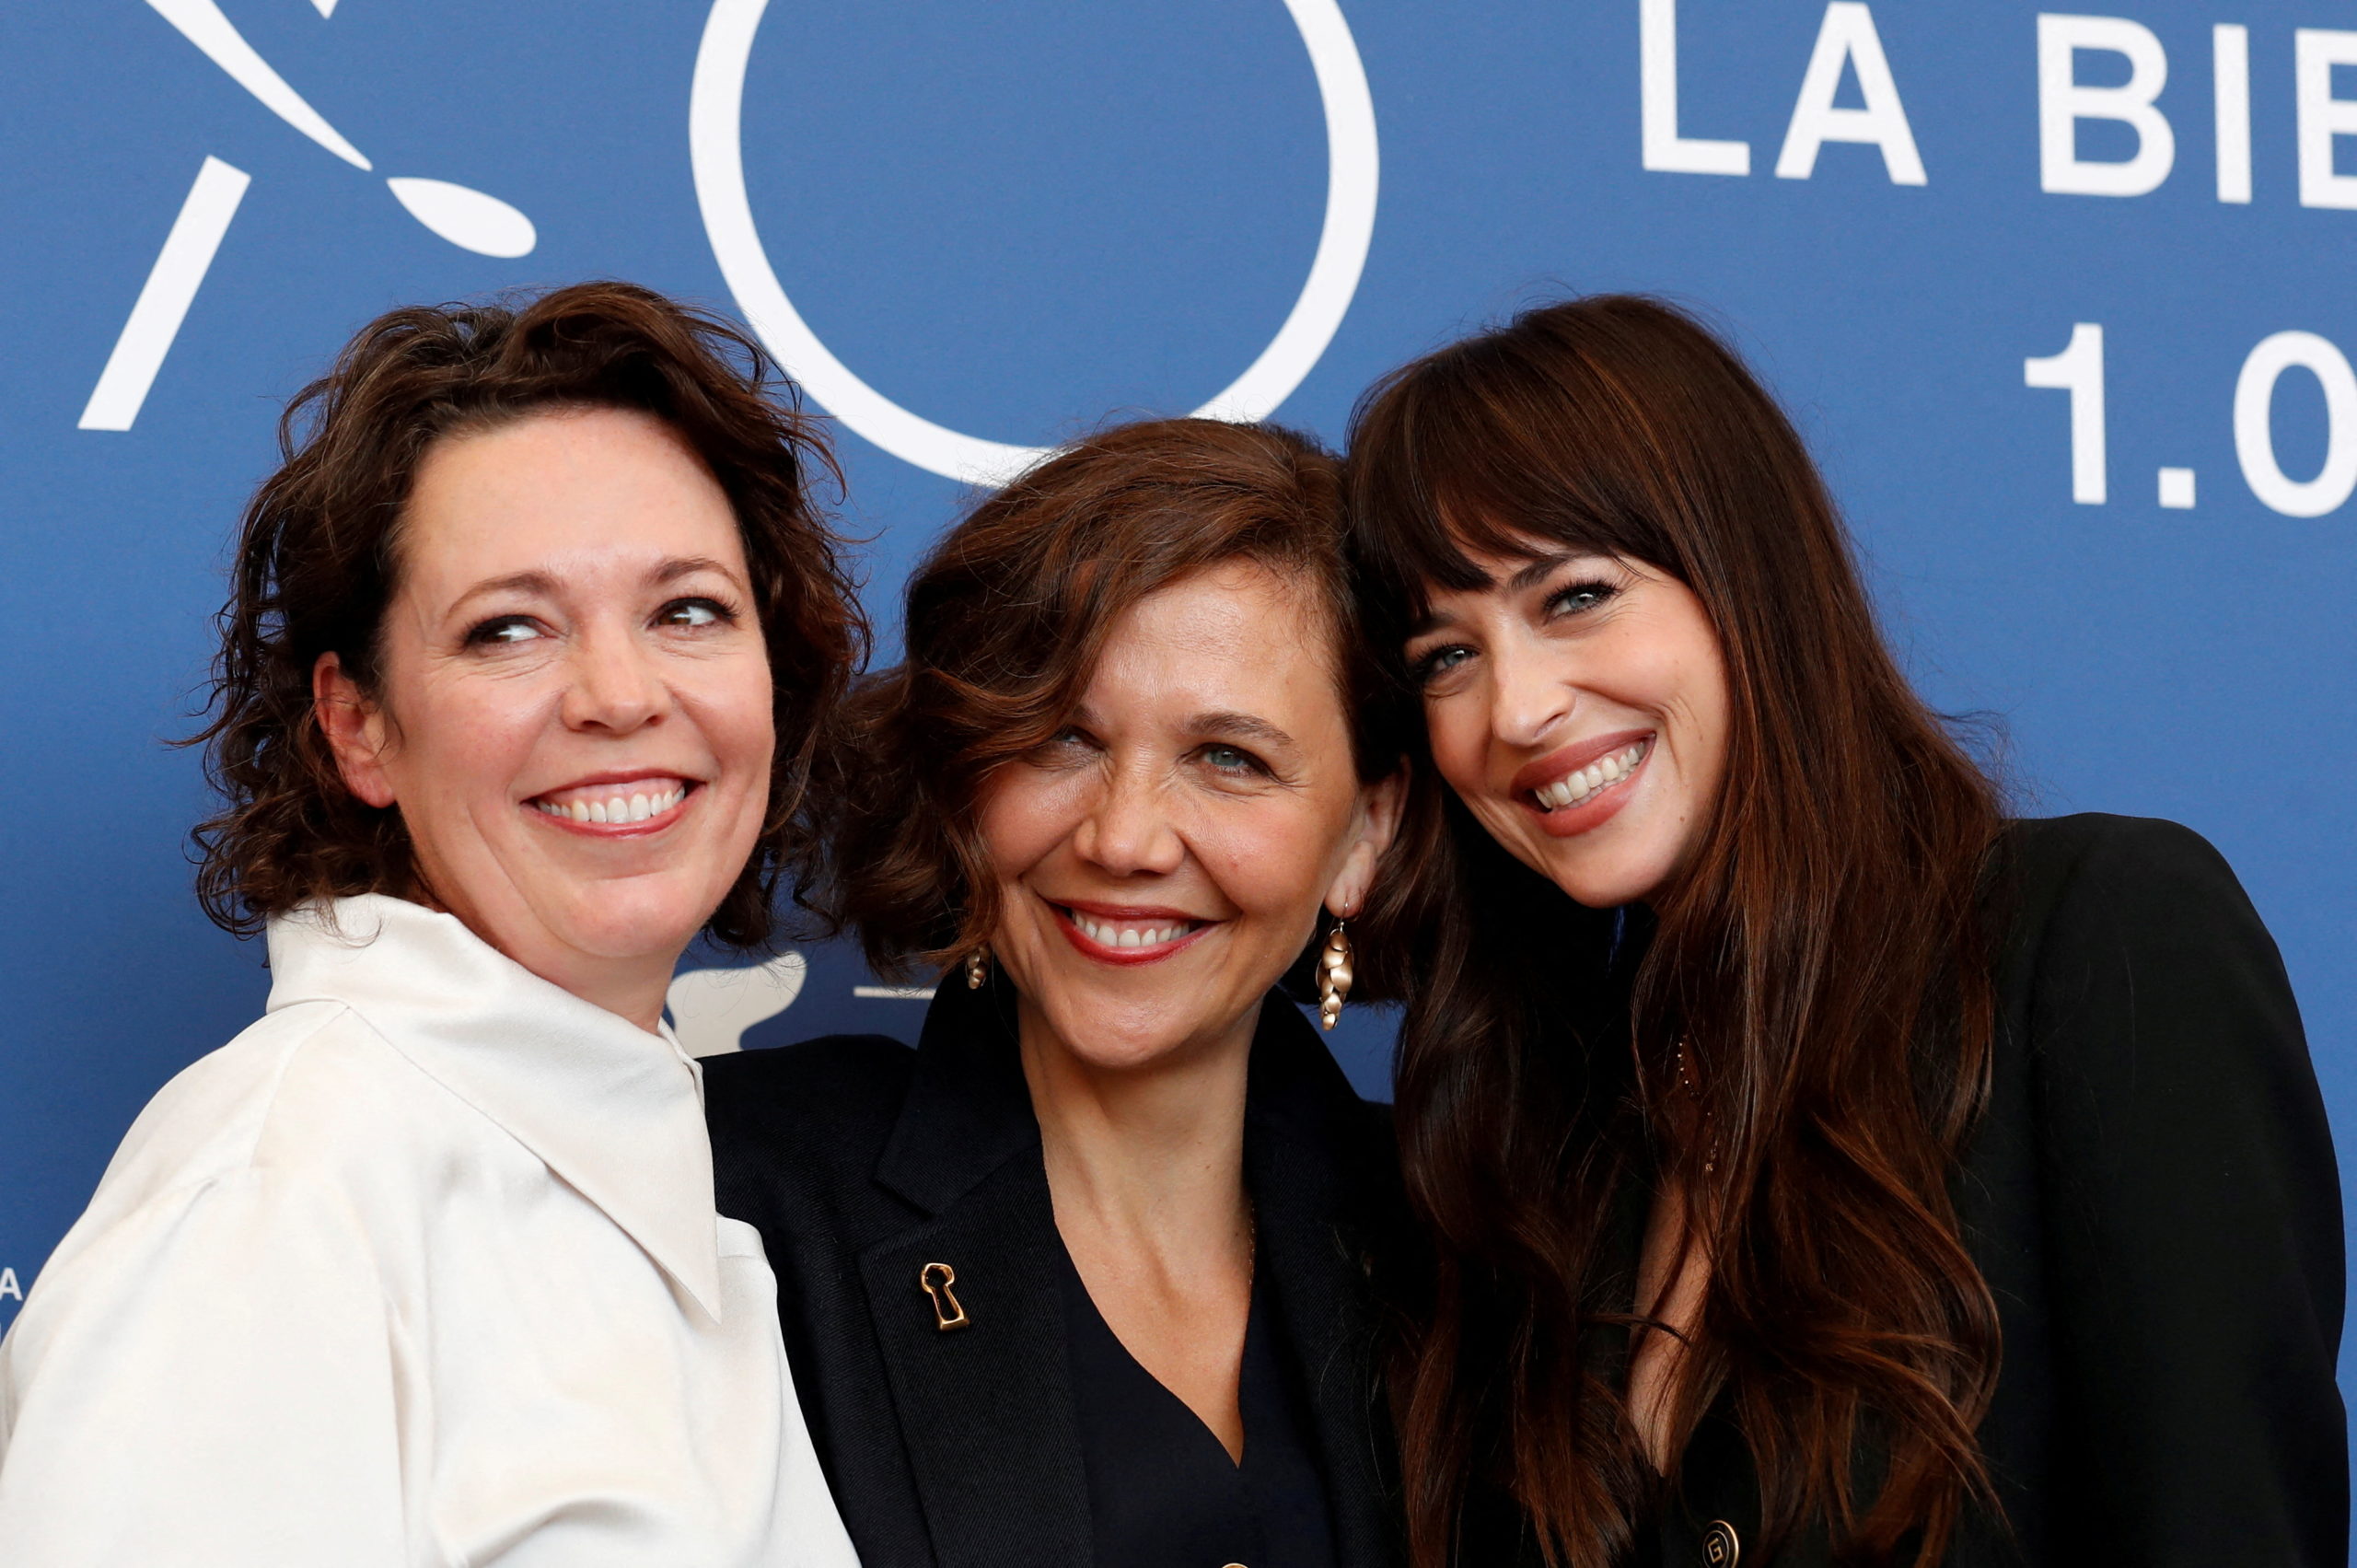 Photo call for "The Lost Daughter" - in competition - Venice, Italy September 3, 2021 - Director Maggie Gyllenhaal and actors Dakota Johnson and Olivia Colman pose. REUTERS/Yara Nardi